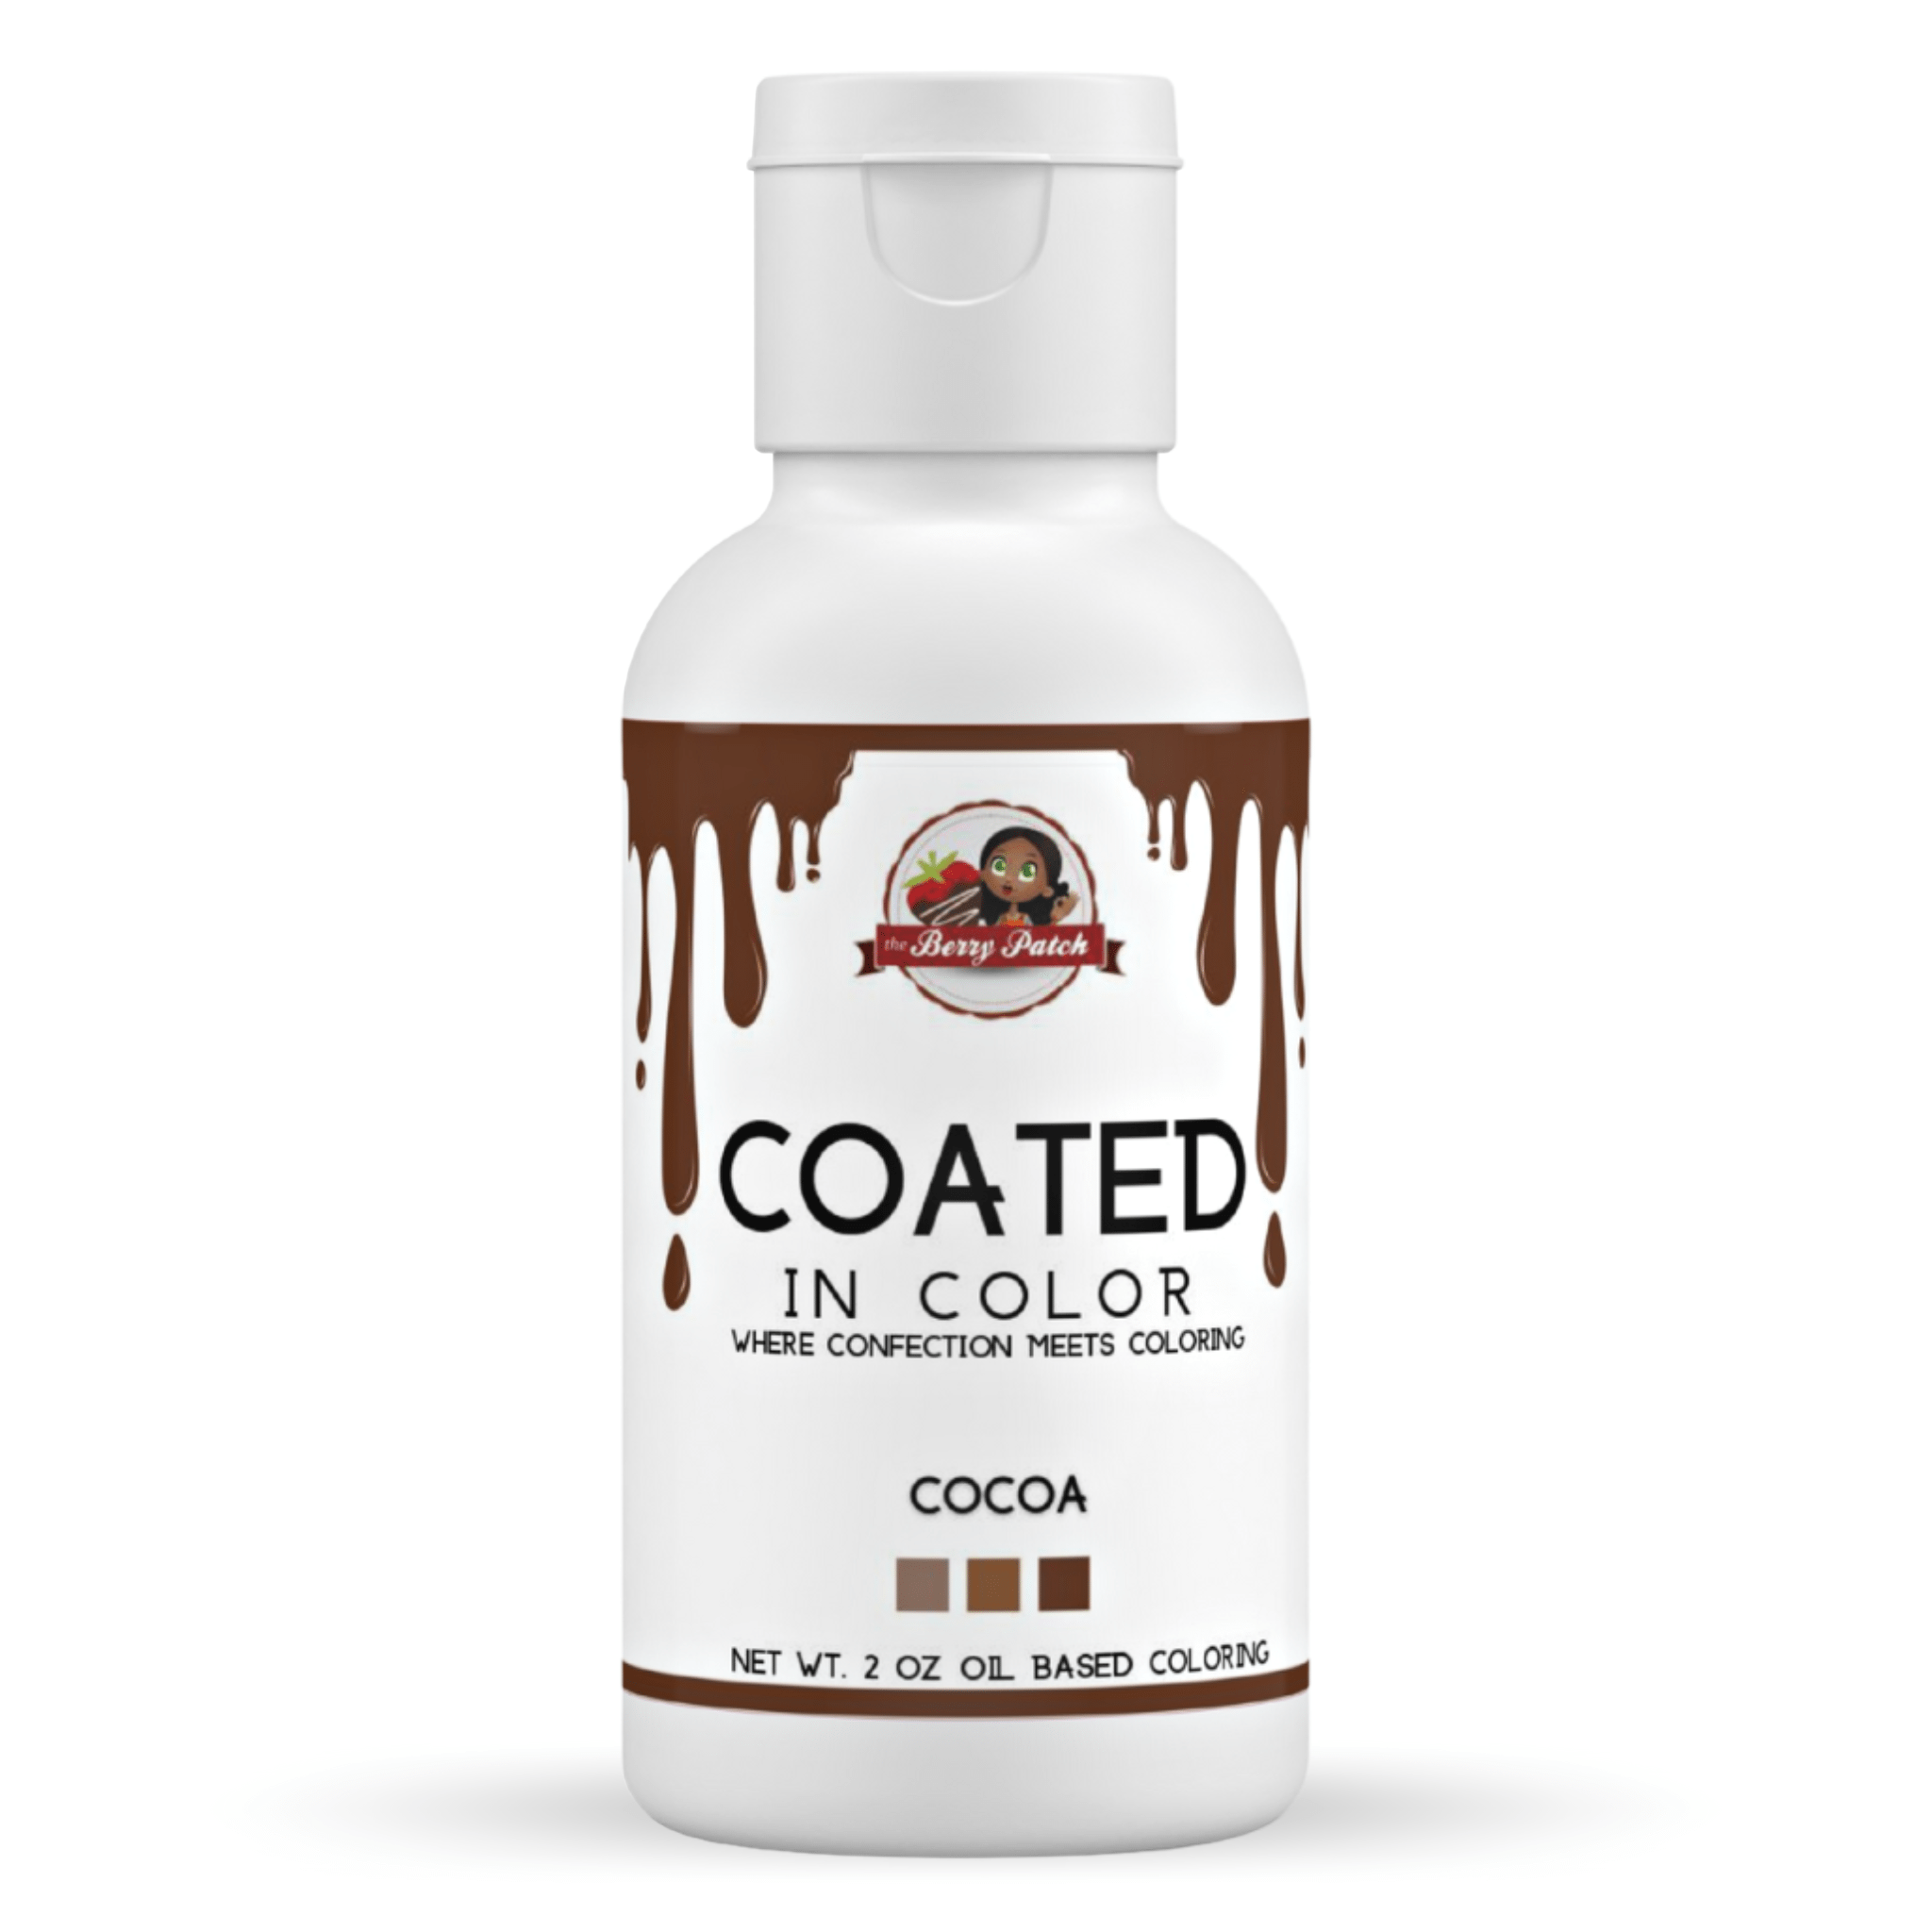 Cocoa Oil Based Coloring